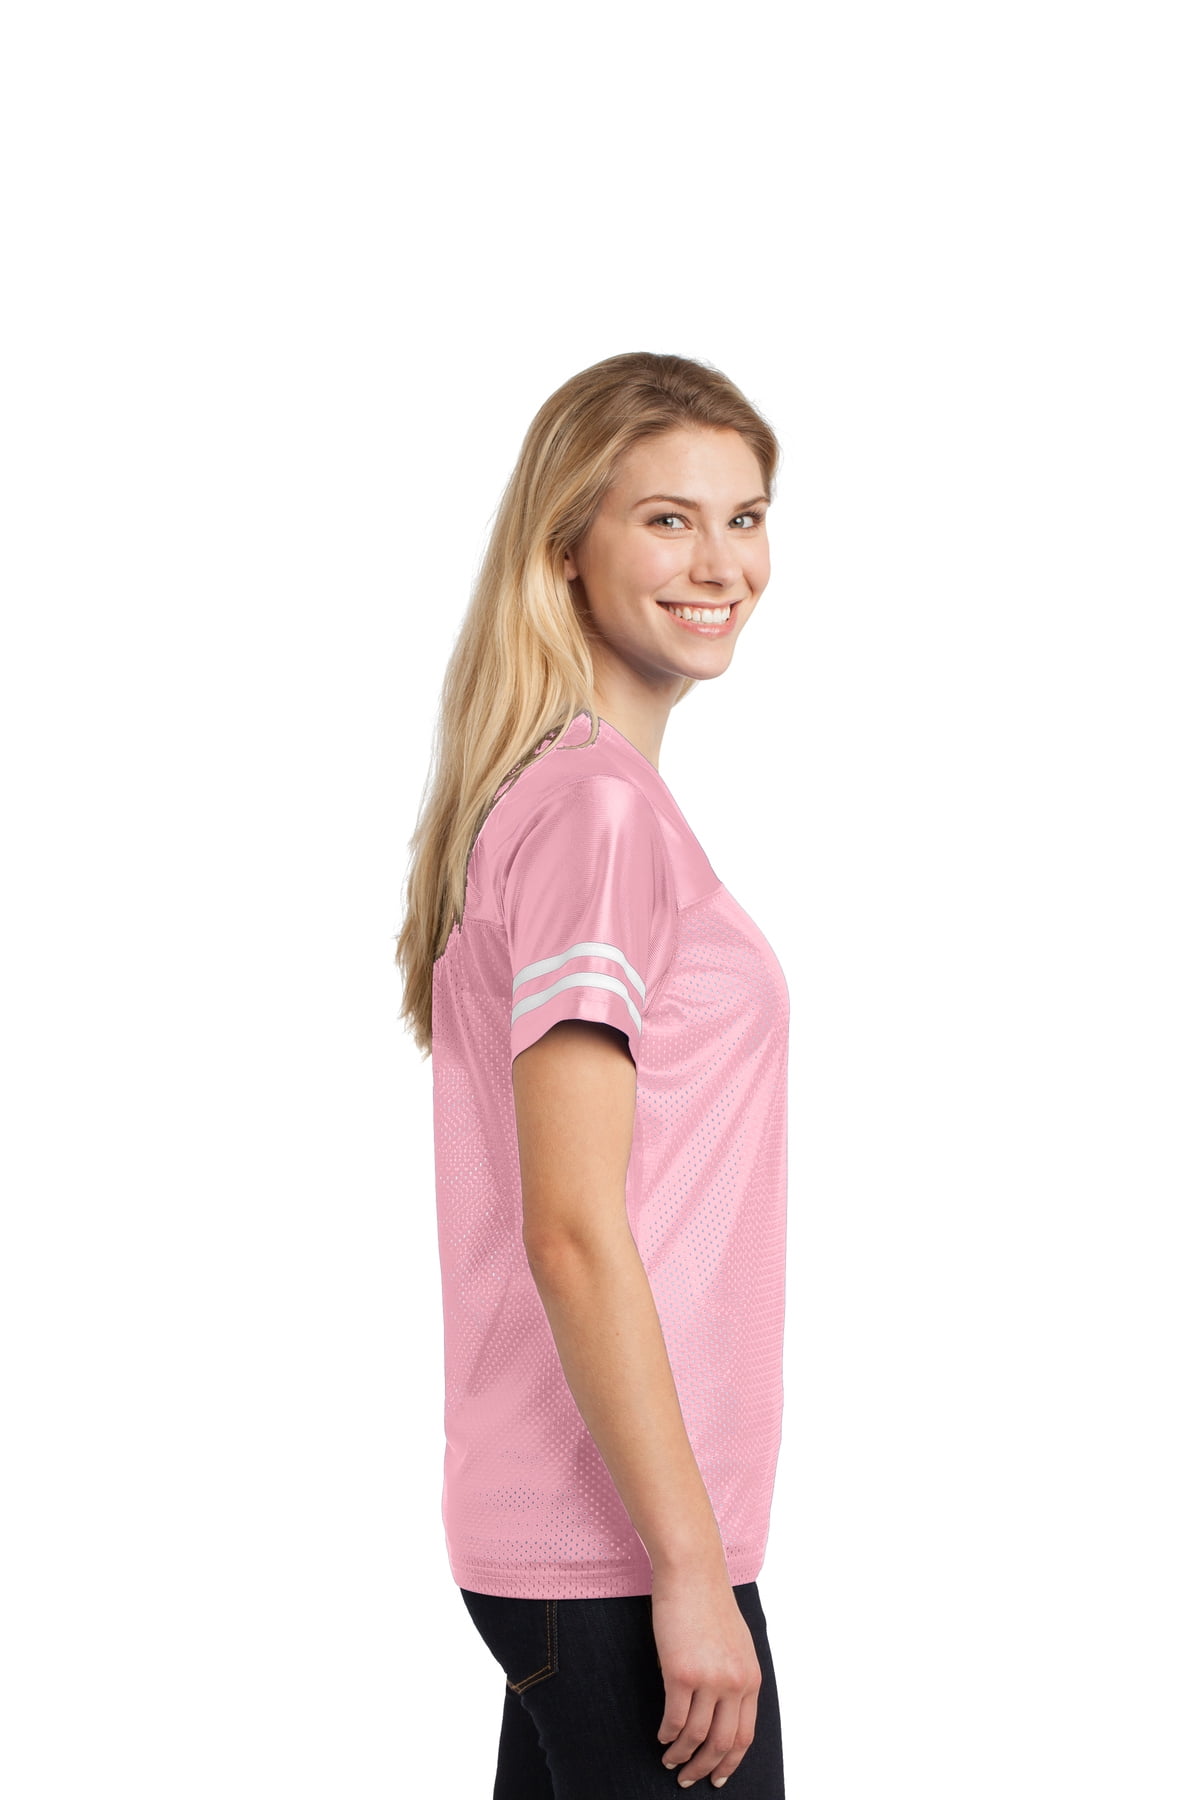 Ladies Football Replica Jersey Color Light Pink/White X-Large Size 